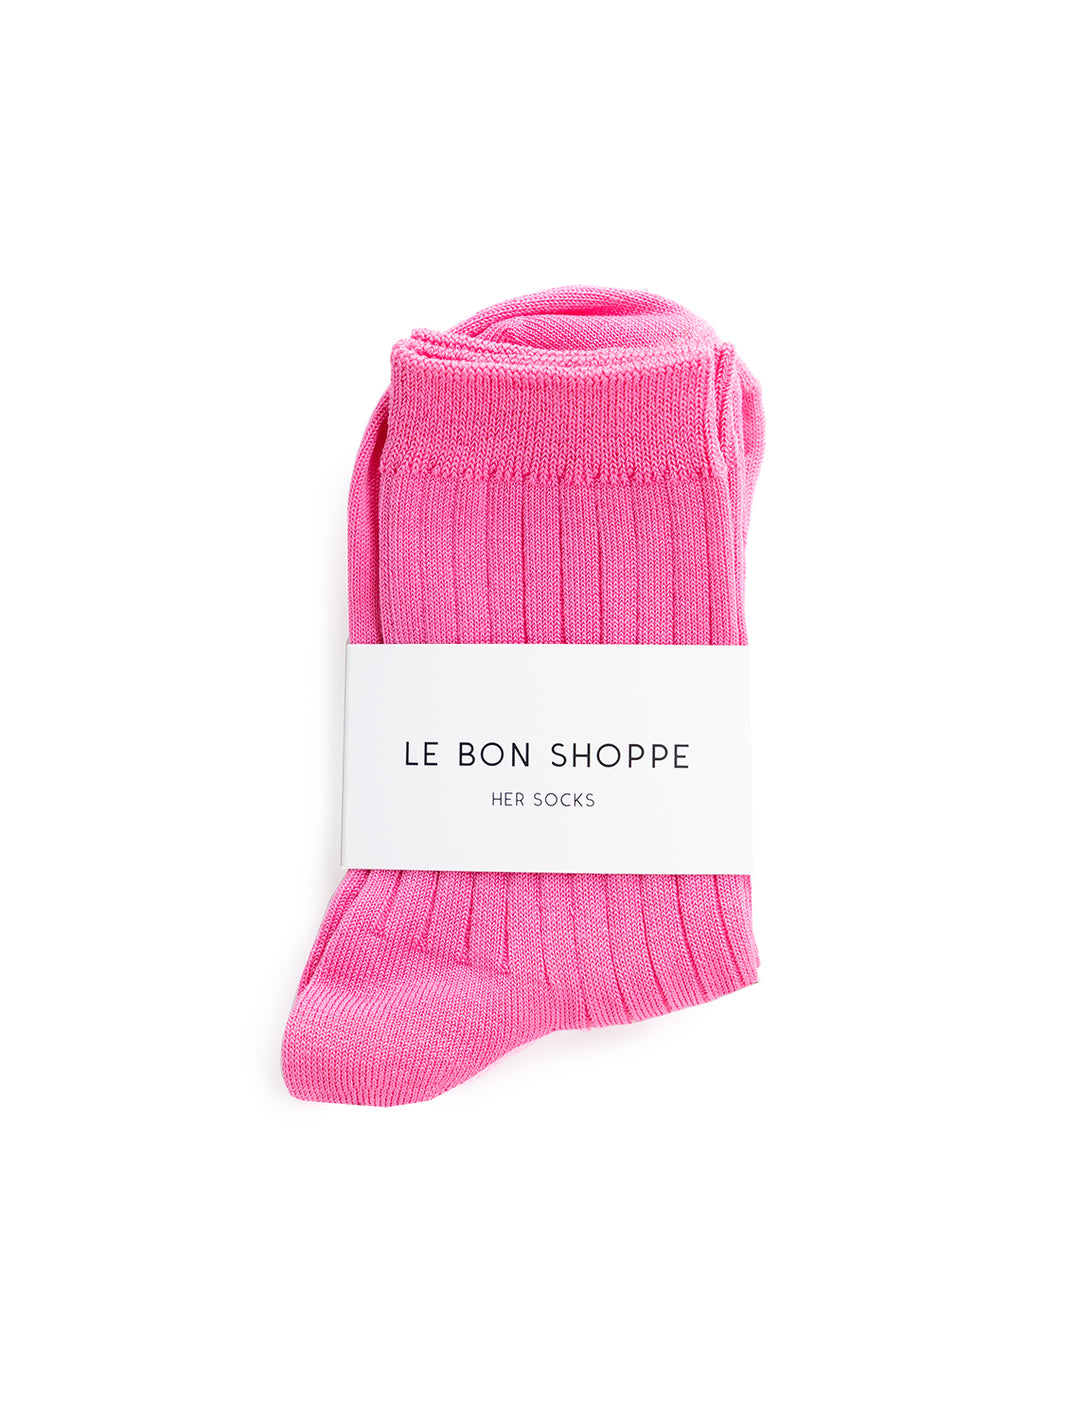 Front view of Le Bon Shoppe's her socks in bright pink.